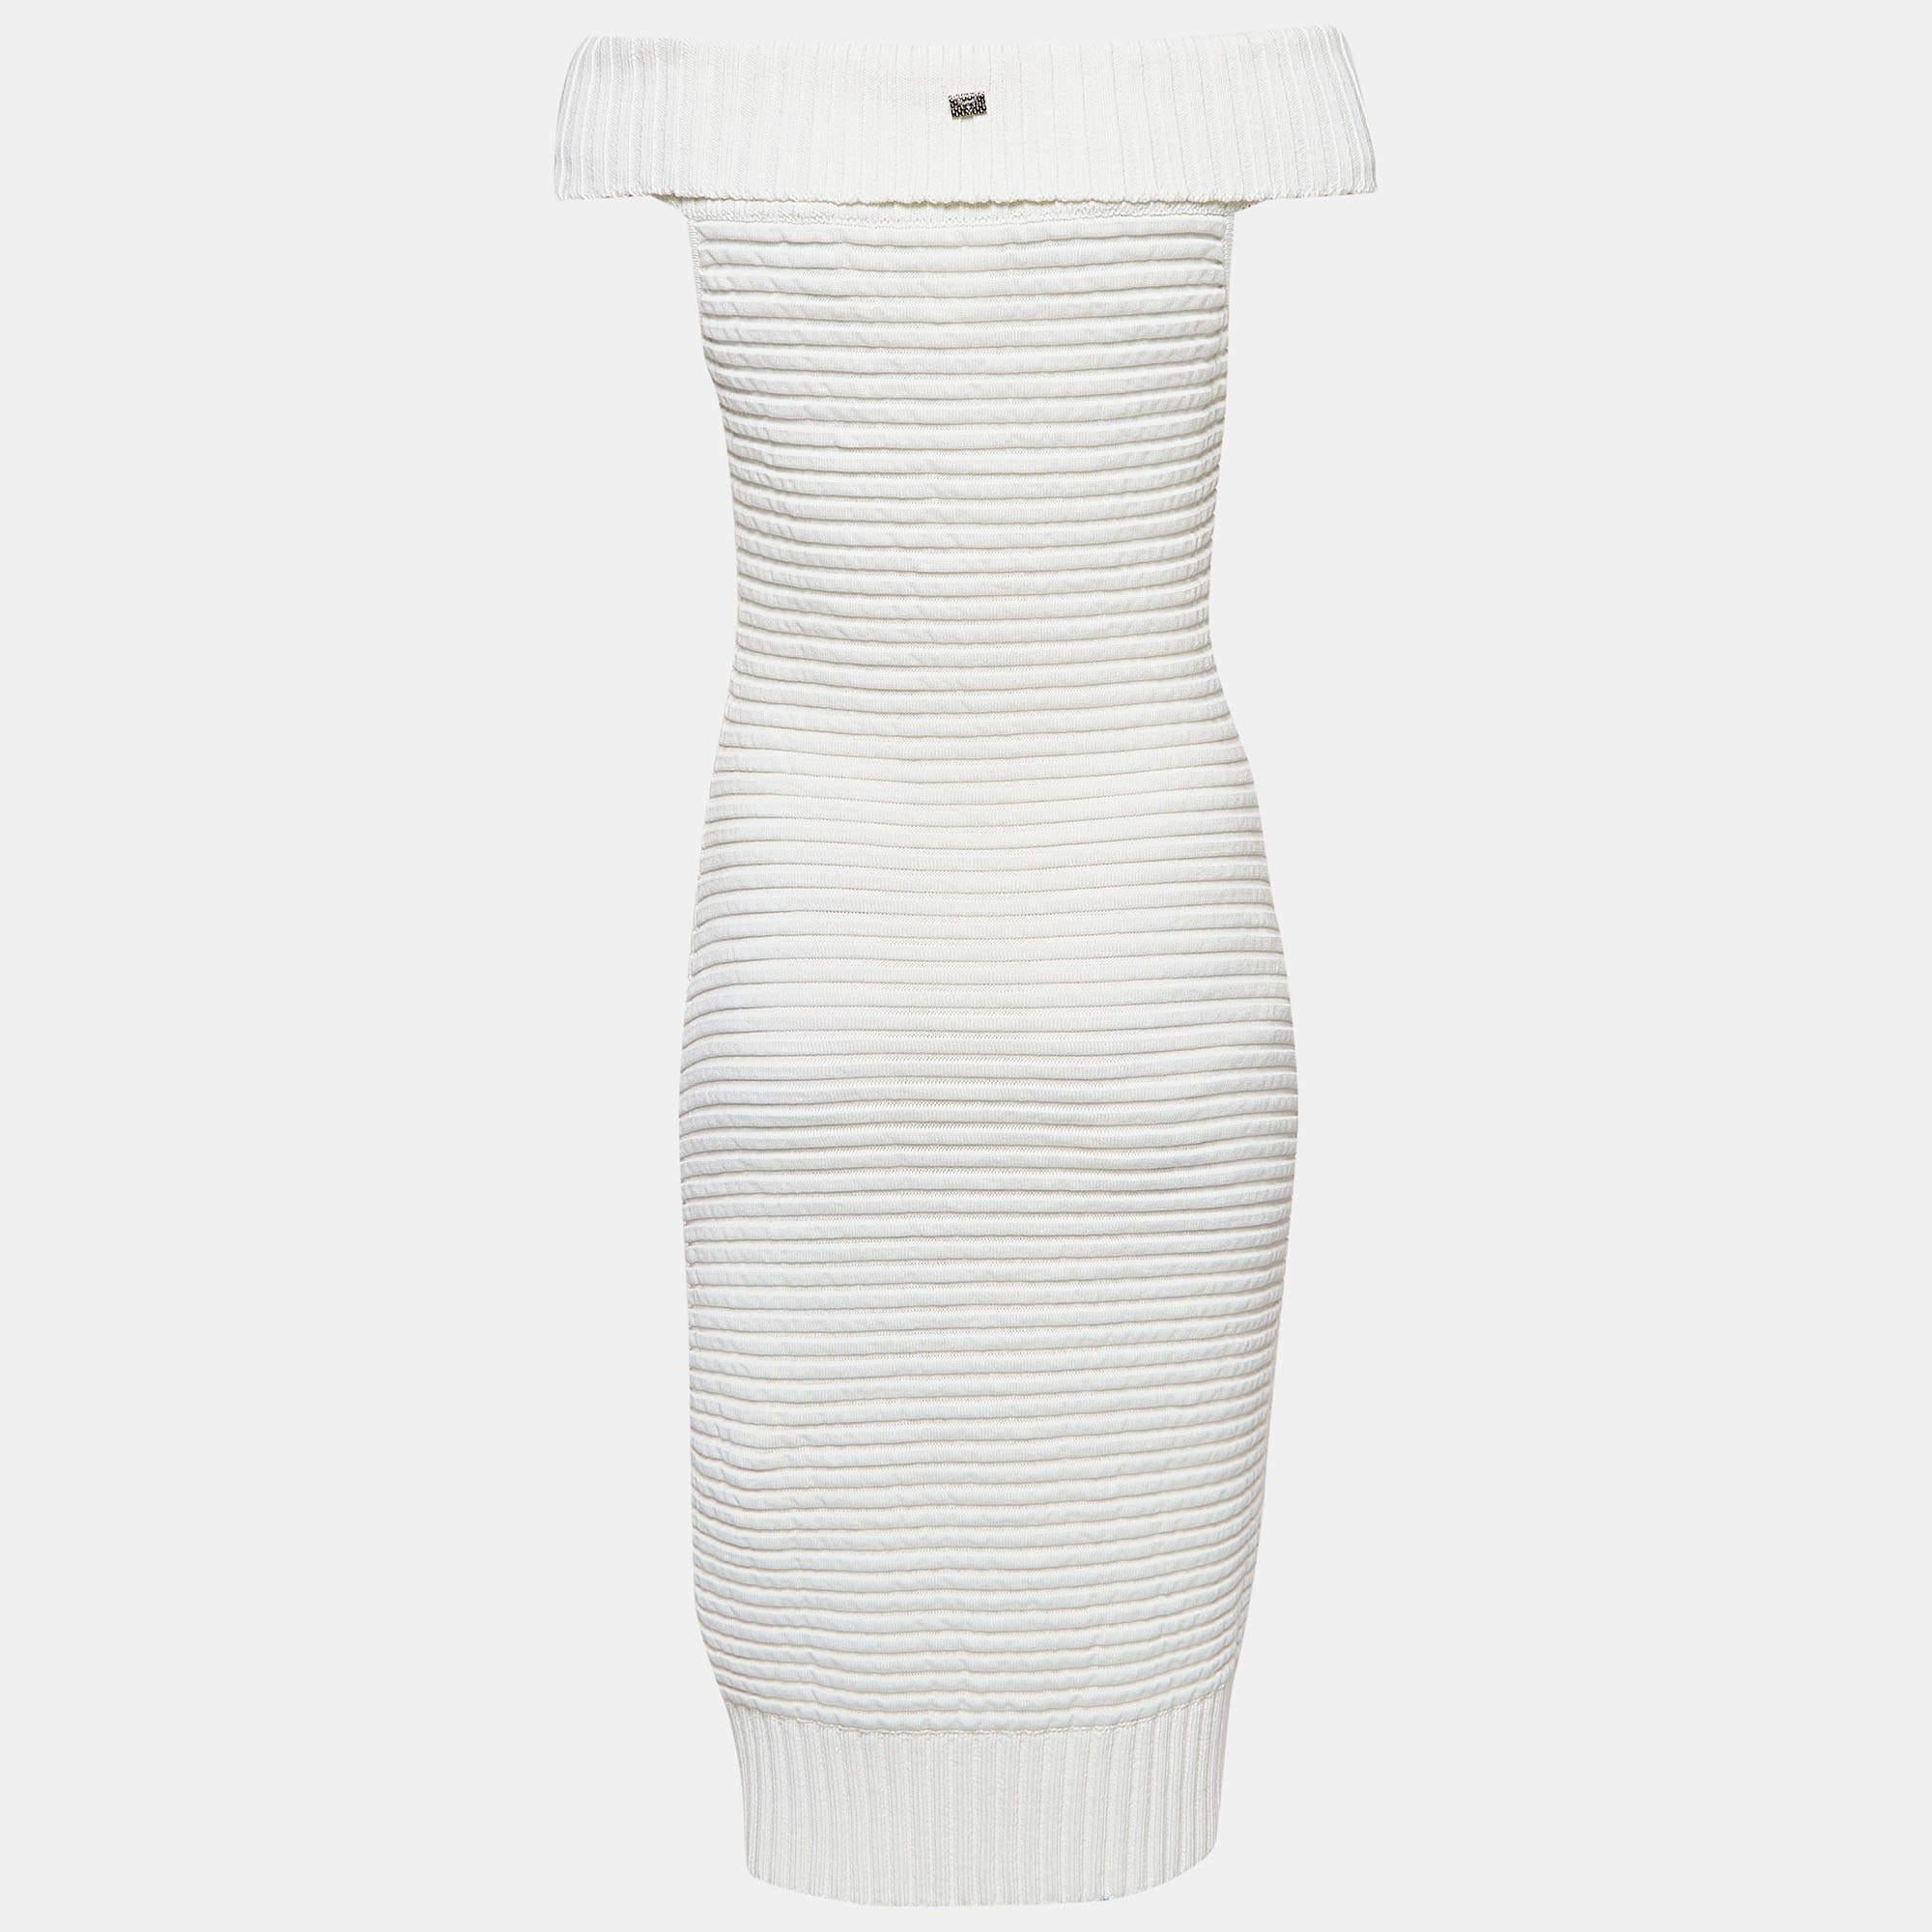 The fine artistry and the feminine silhouette of this Chanel dress exhibit the label's impeccable craftsmanship in tailoring. It is stitched using quality materials, has a good fit, and can be easily styled with chic accessories, open-toe sandals,